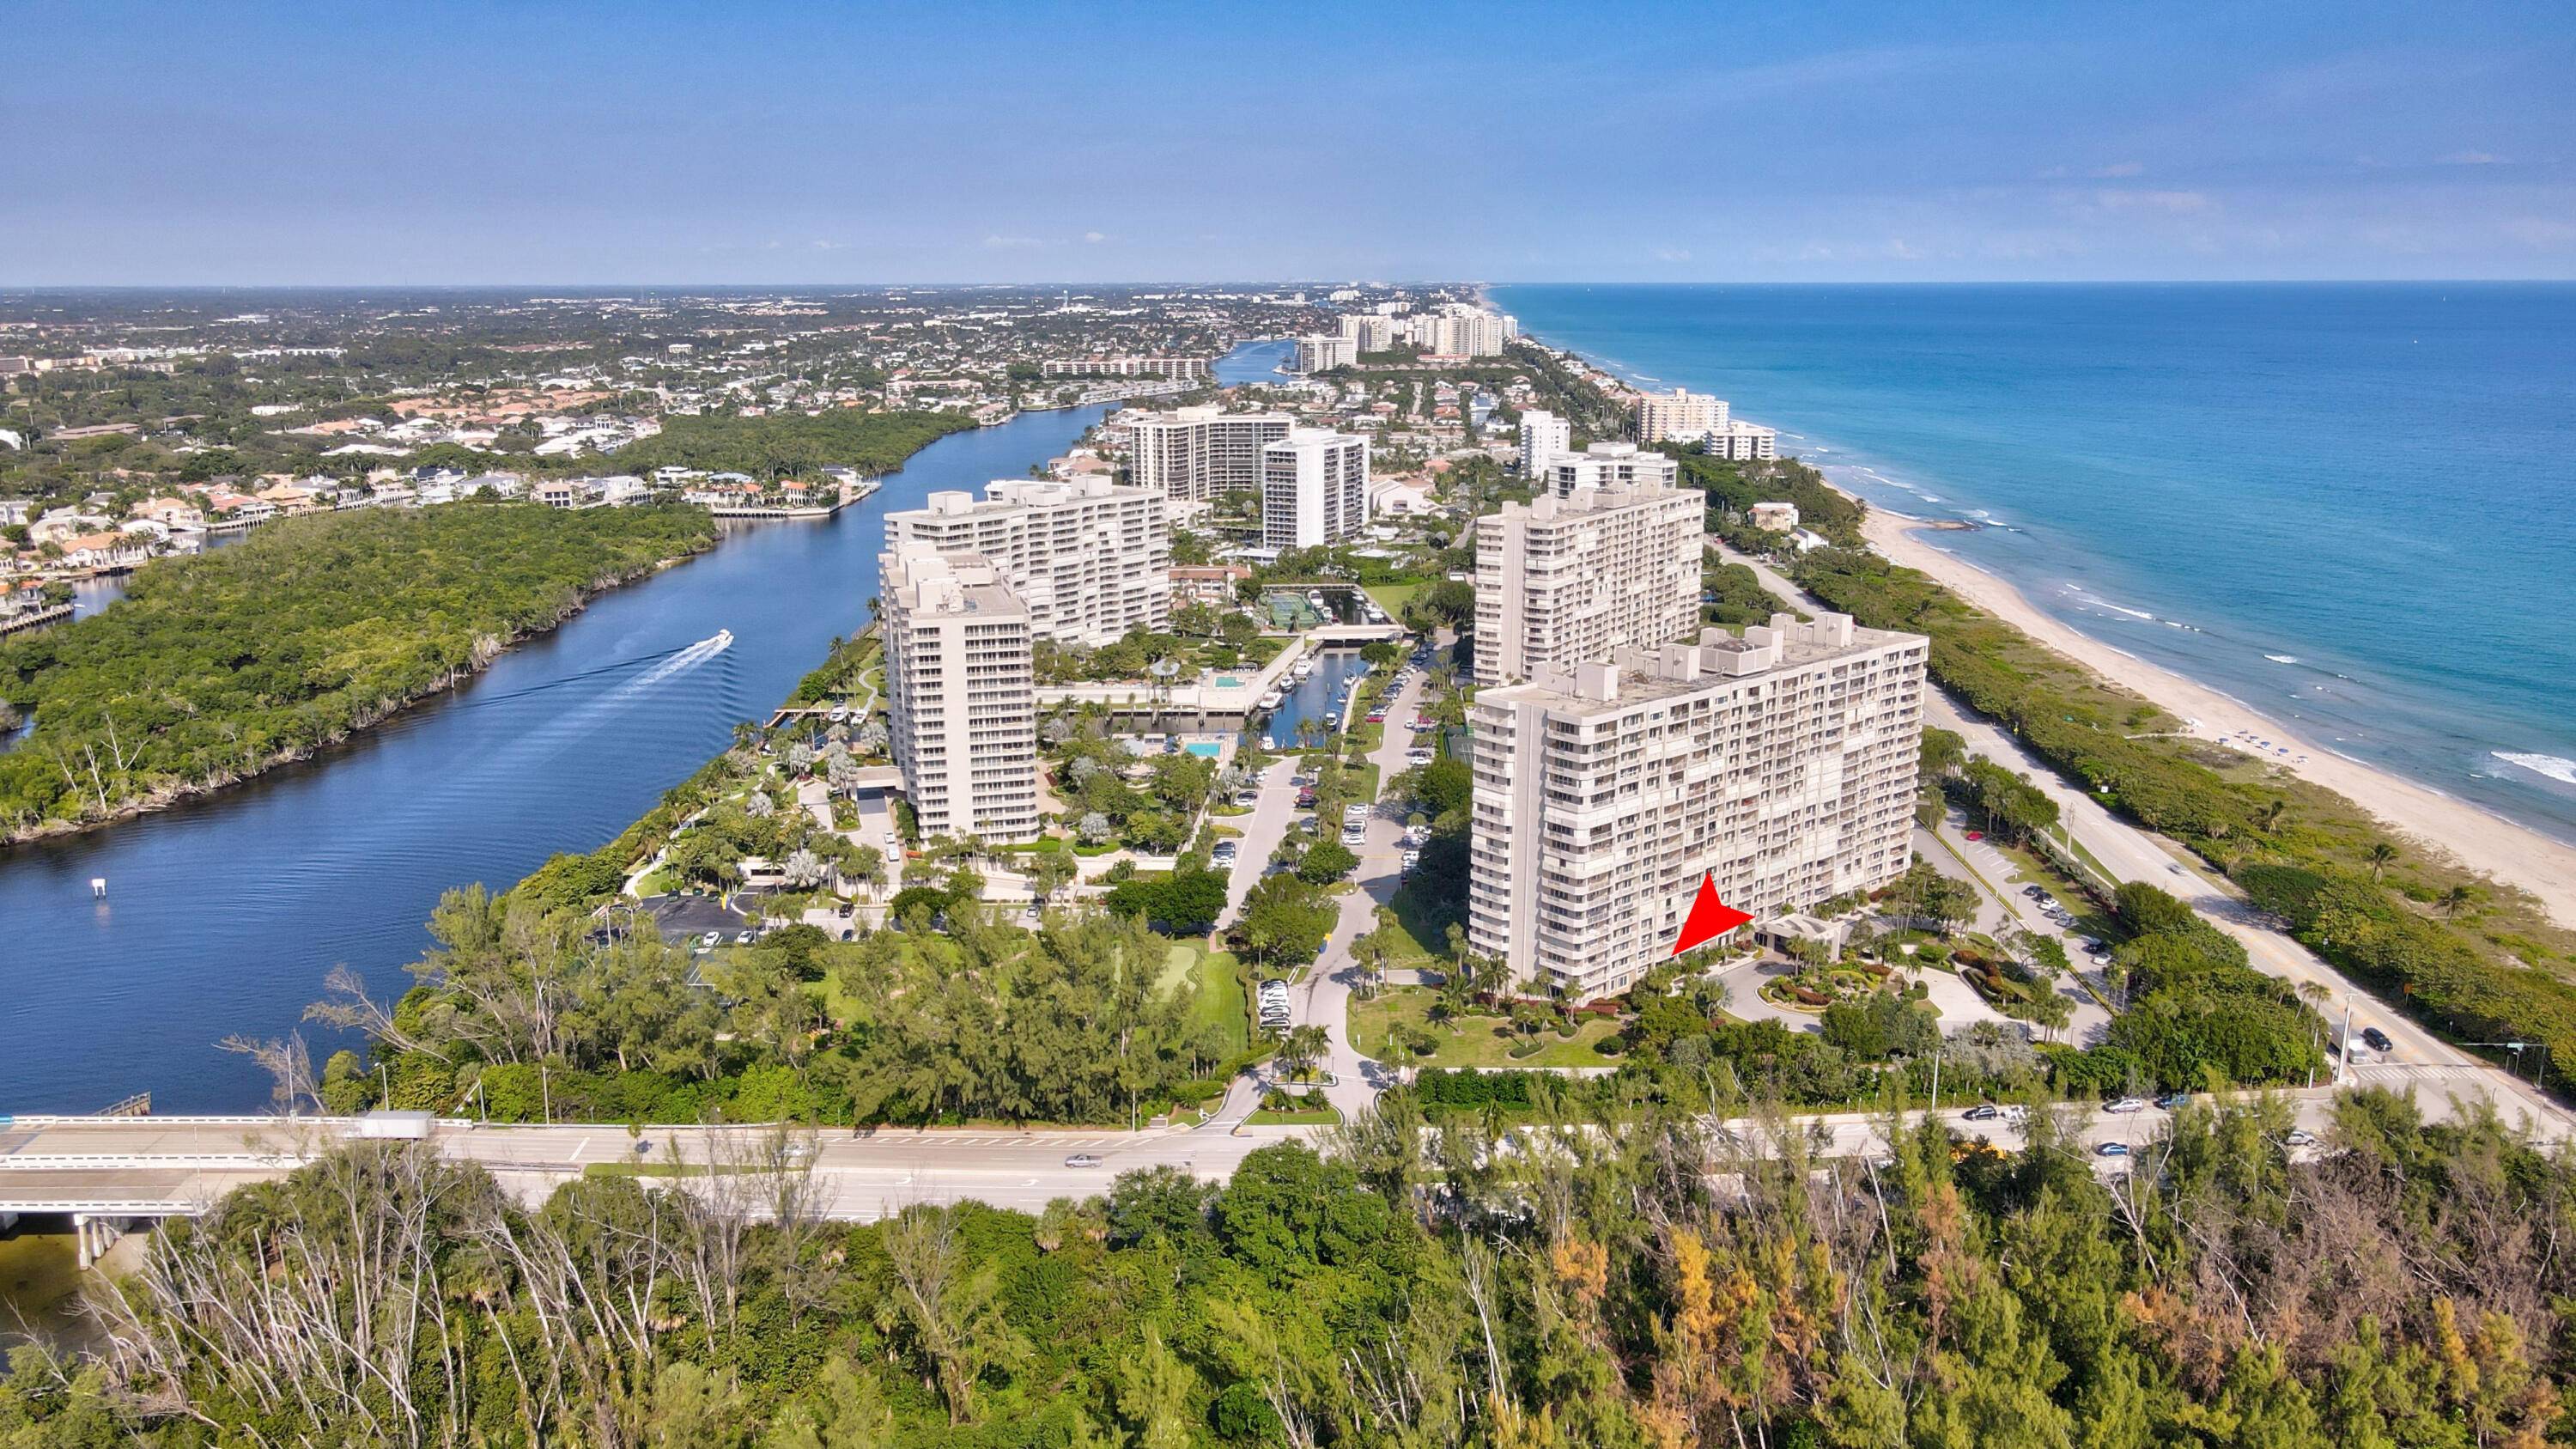 Incredible opportunity to purchase the largest 2 bedroom, 2 full bath, luxury condo available at Sea Ranch Club of Boca.